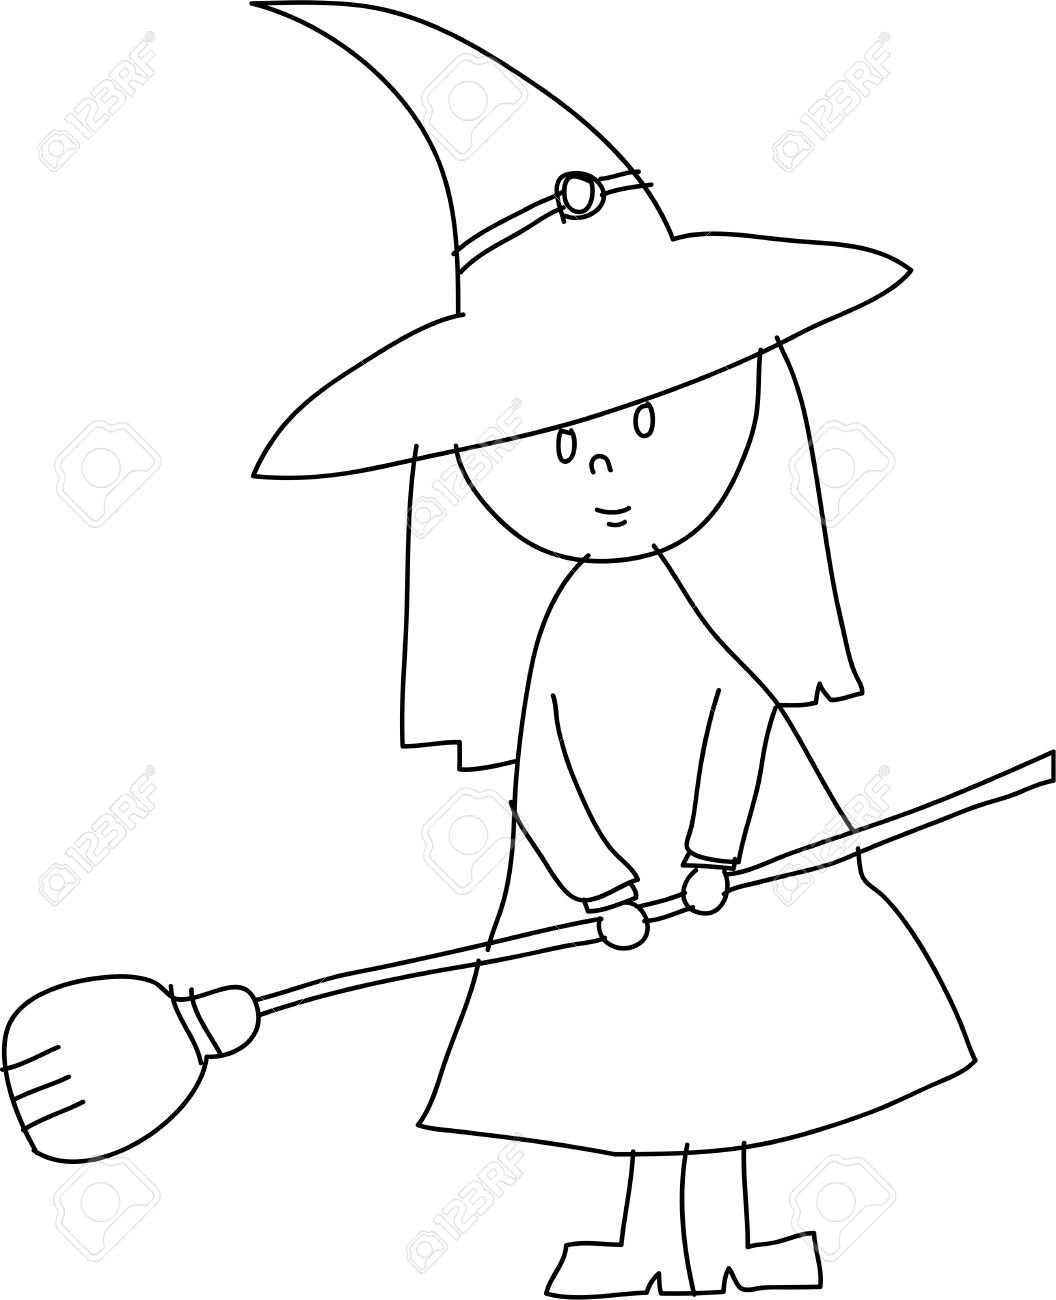 witch drawing